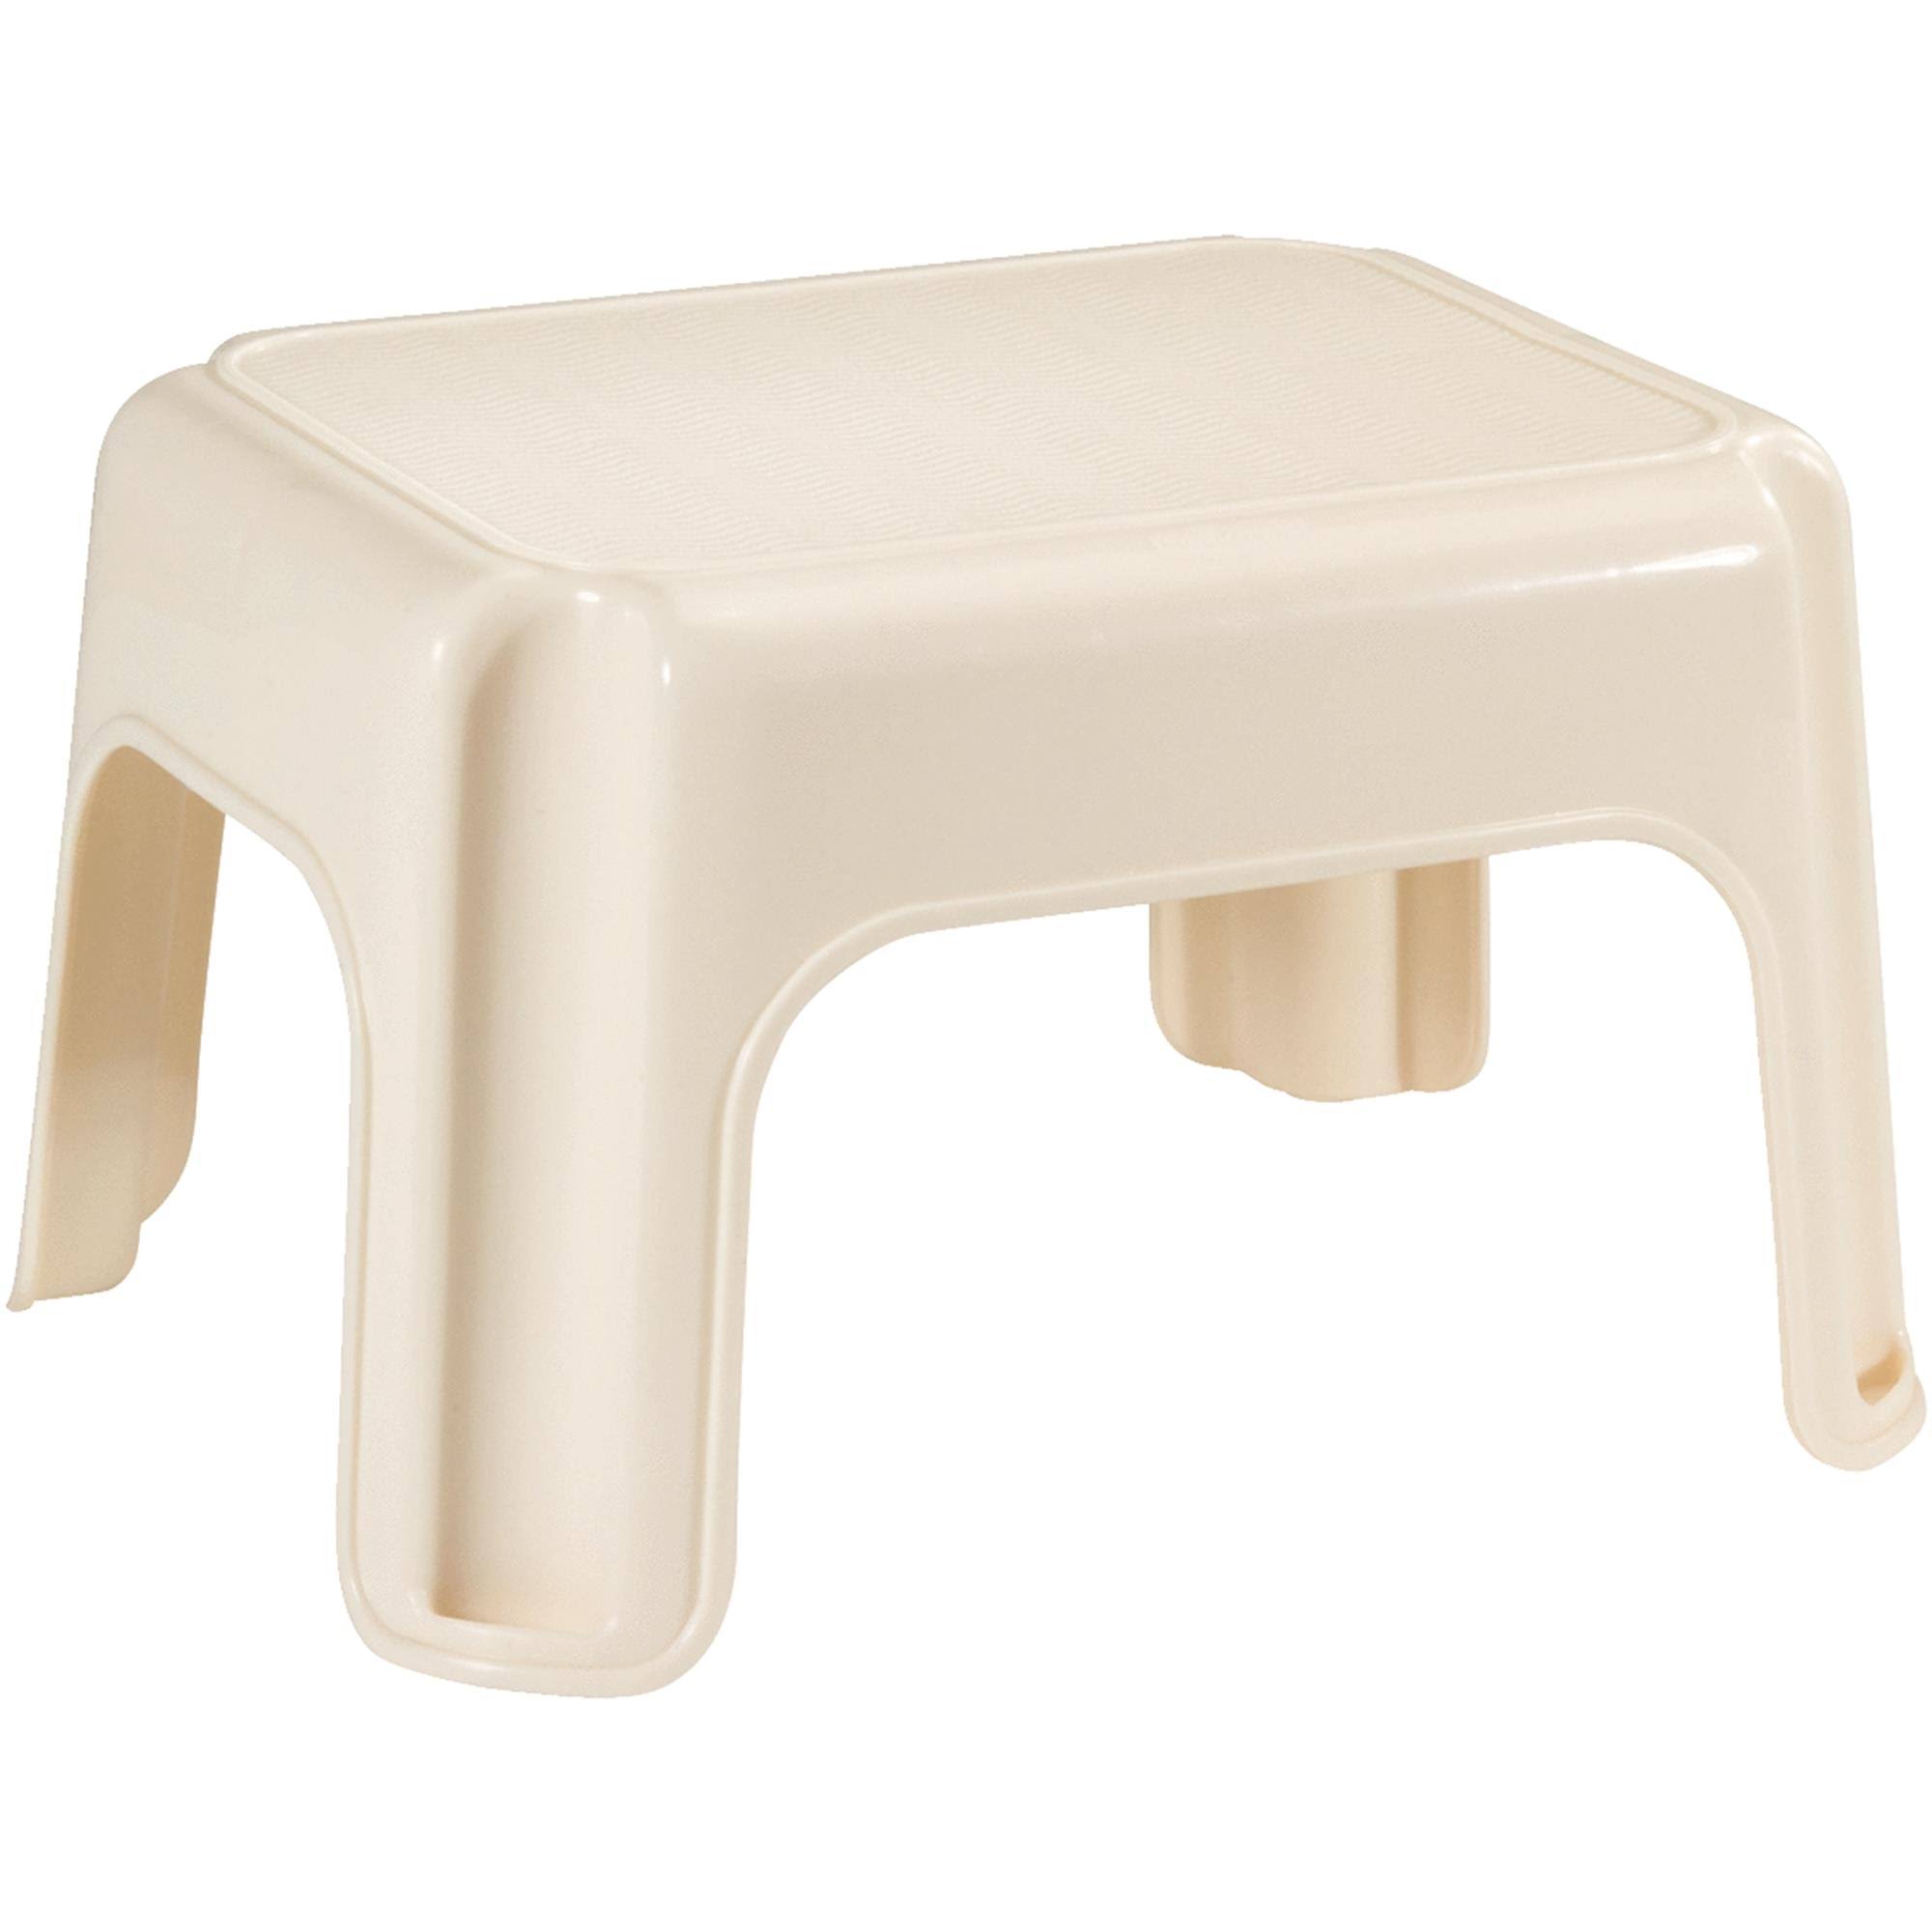 Rubbermaid Roughneck Step Stool - Bisque